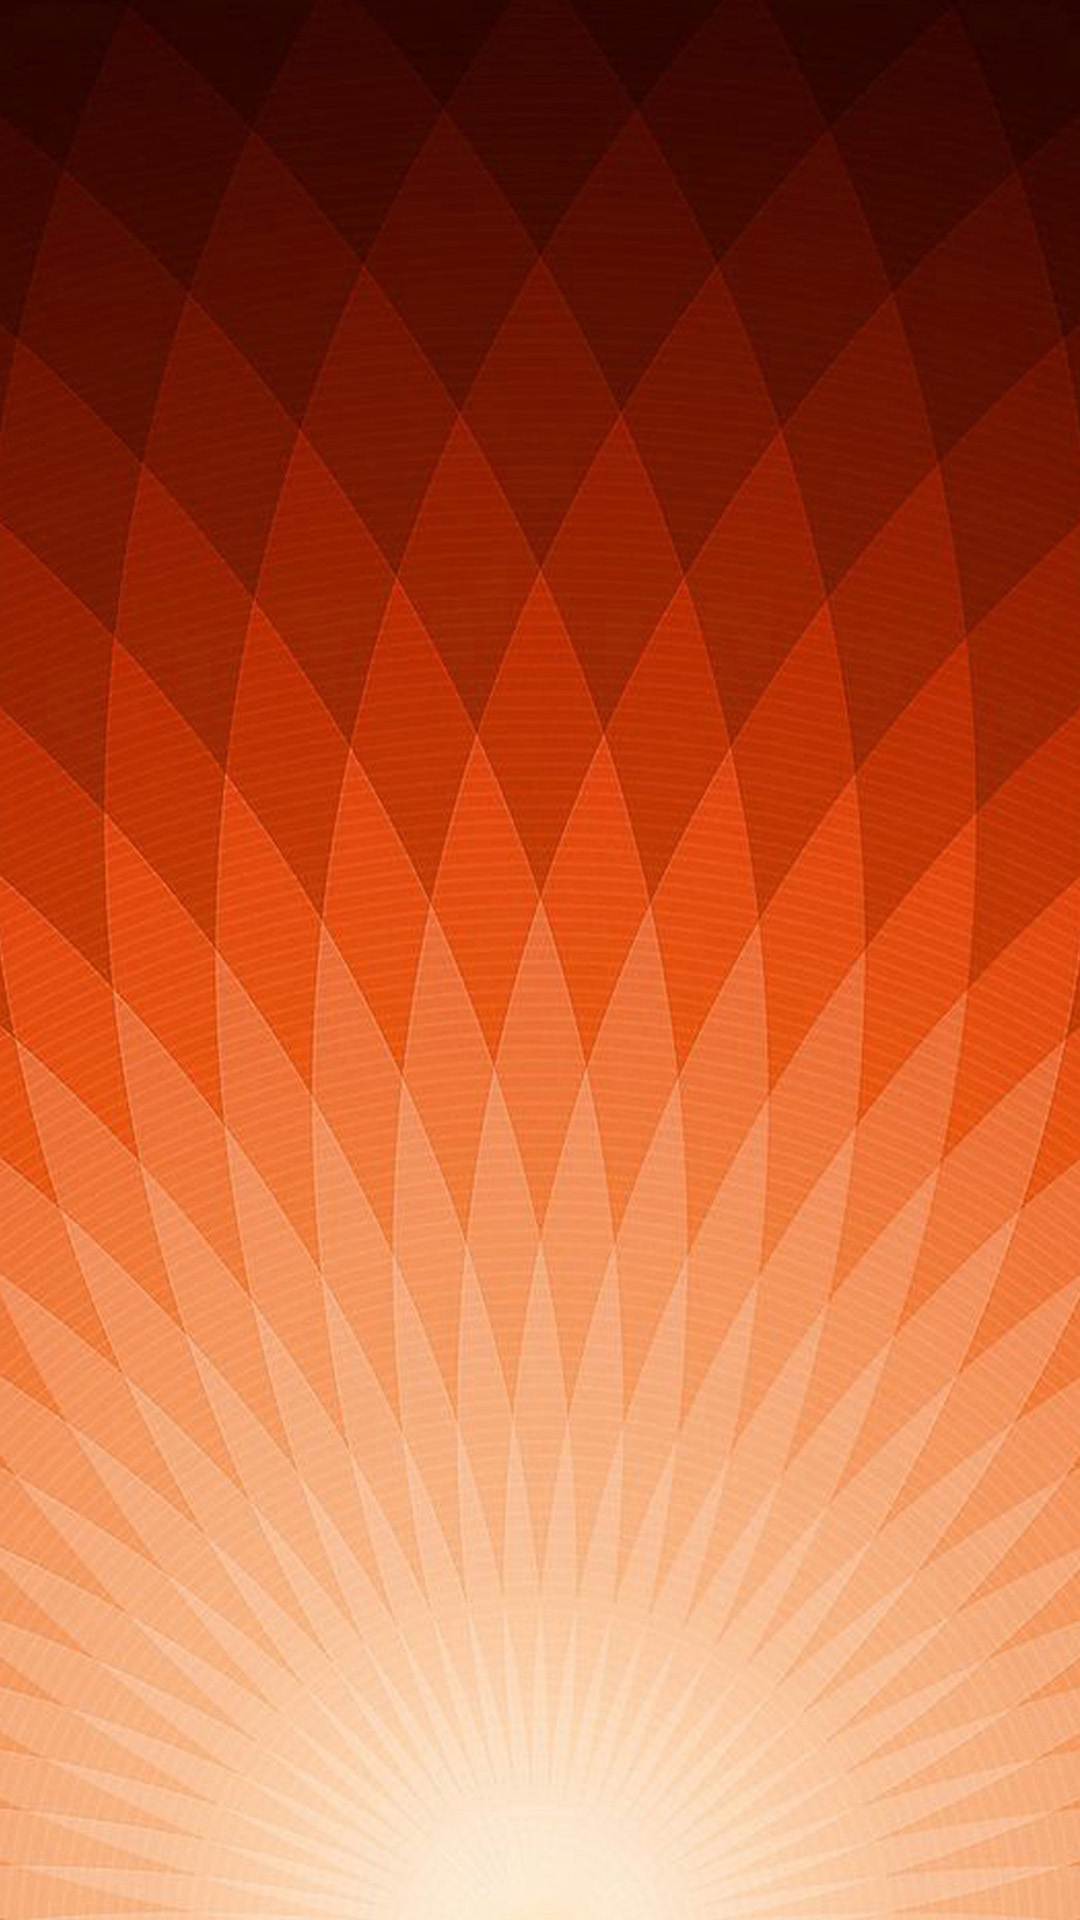 Abstract Htc One M8 - Orange Background Hd Iphone - HD Wallpaper 